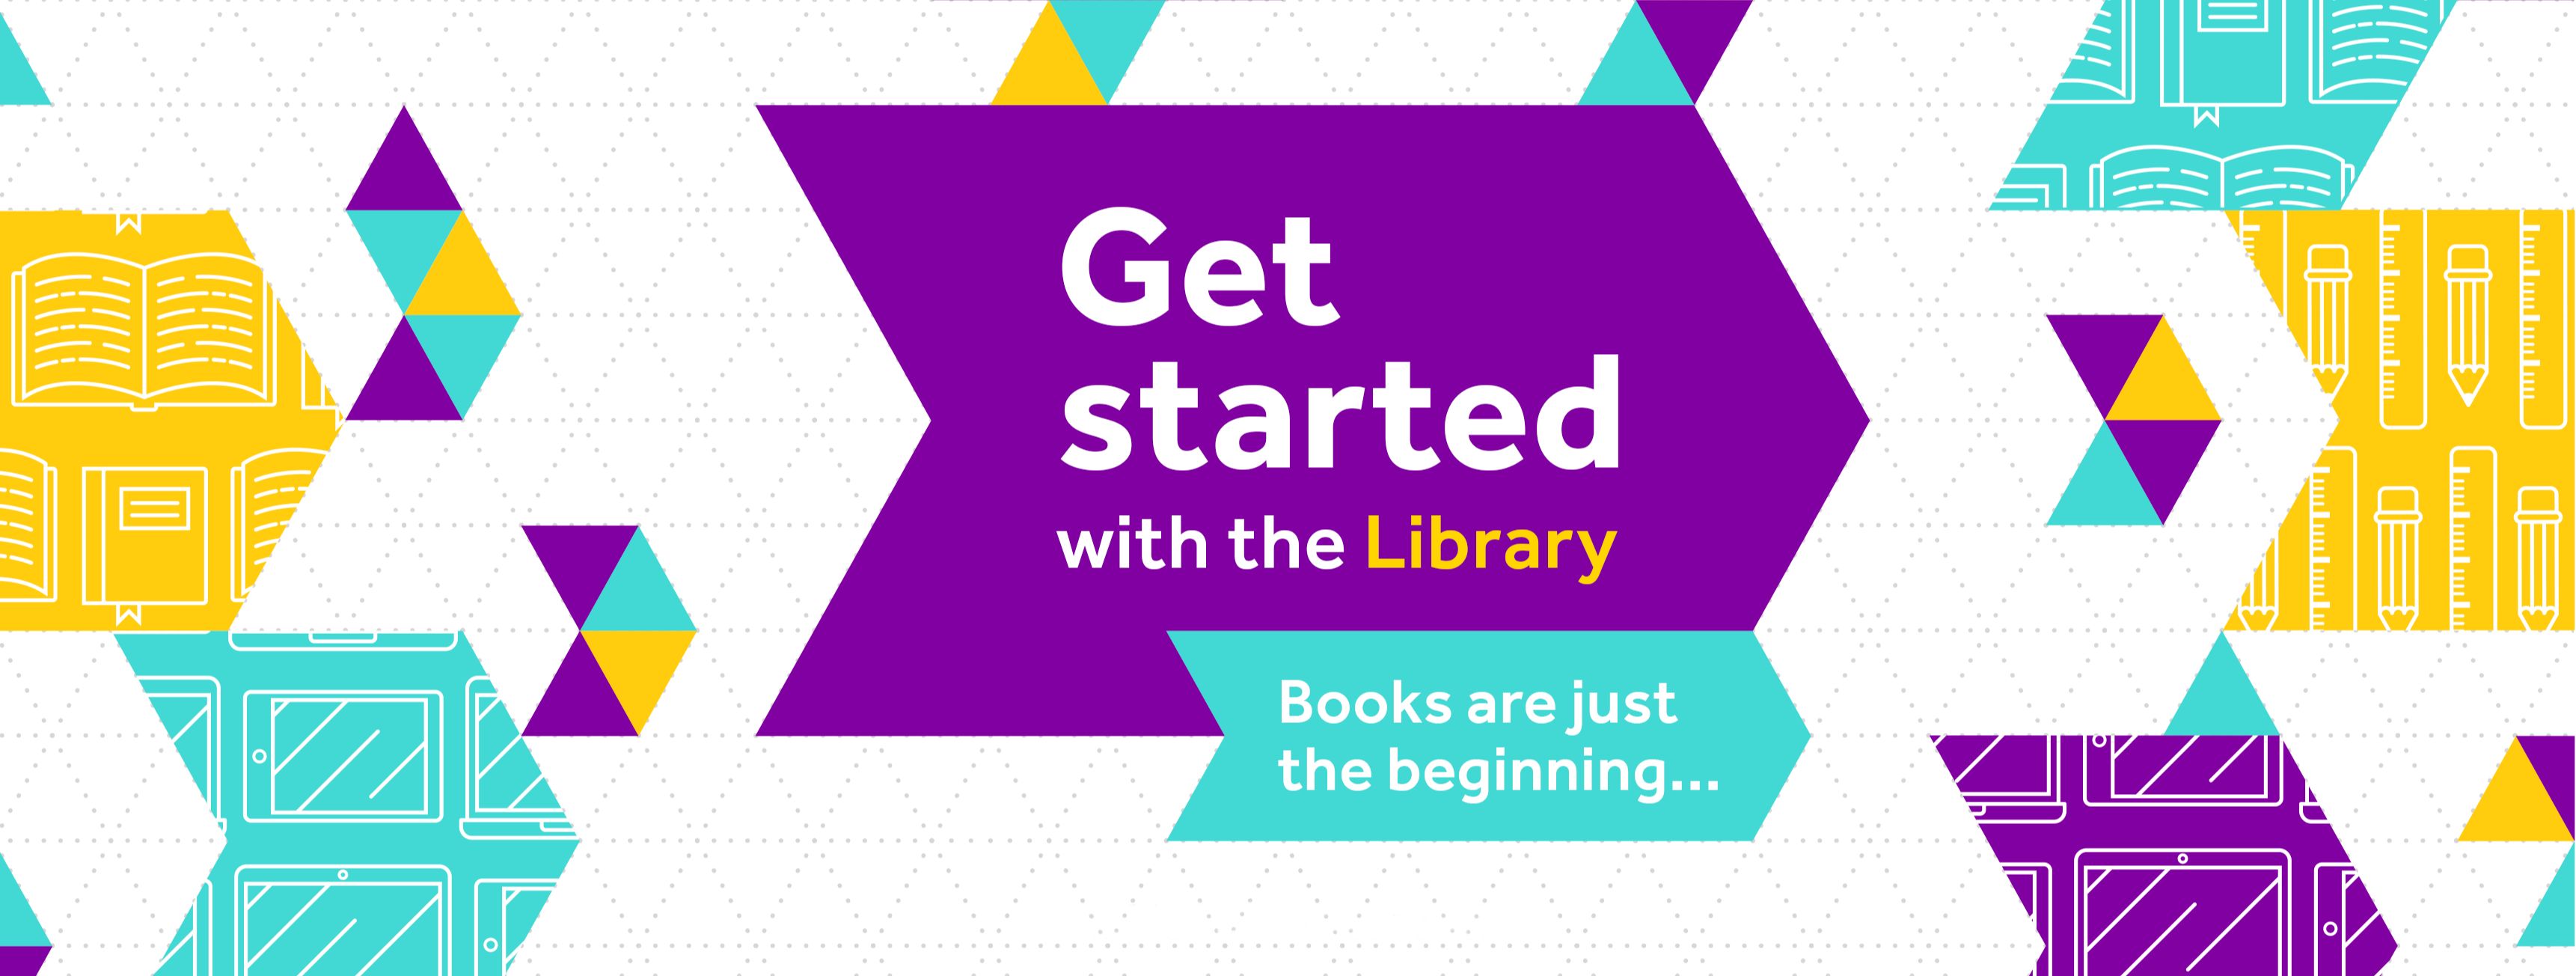 Get Started with the Library